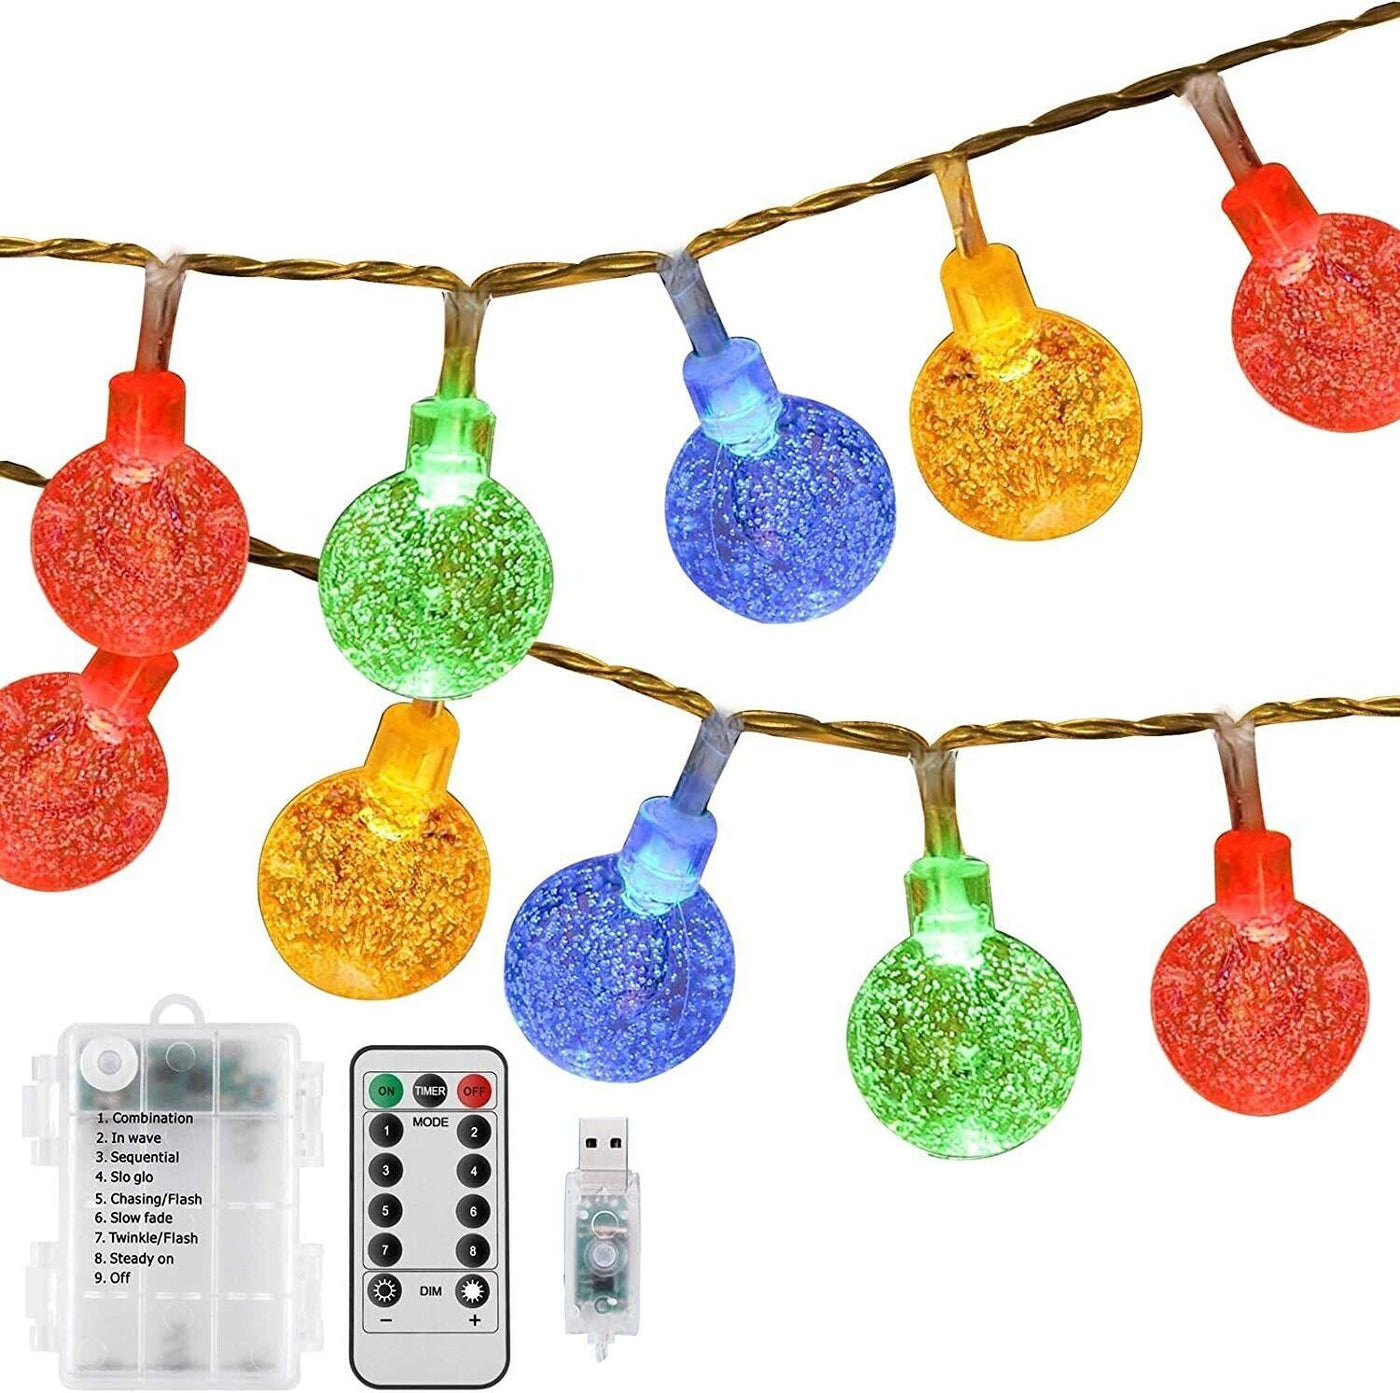 Globe Fairy Lights Battery or USB Operated String Lights 24ft 50LED Crystal Ball - Massive Discounts